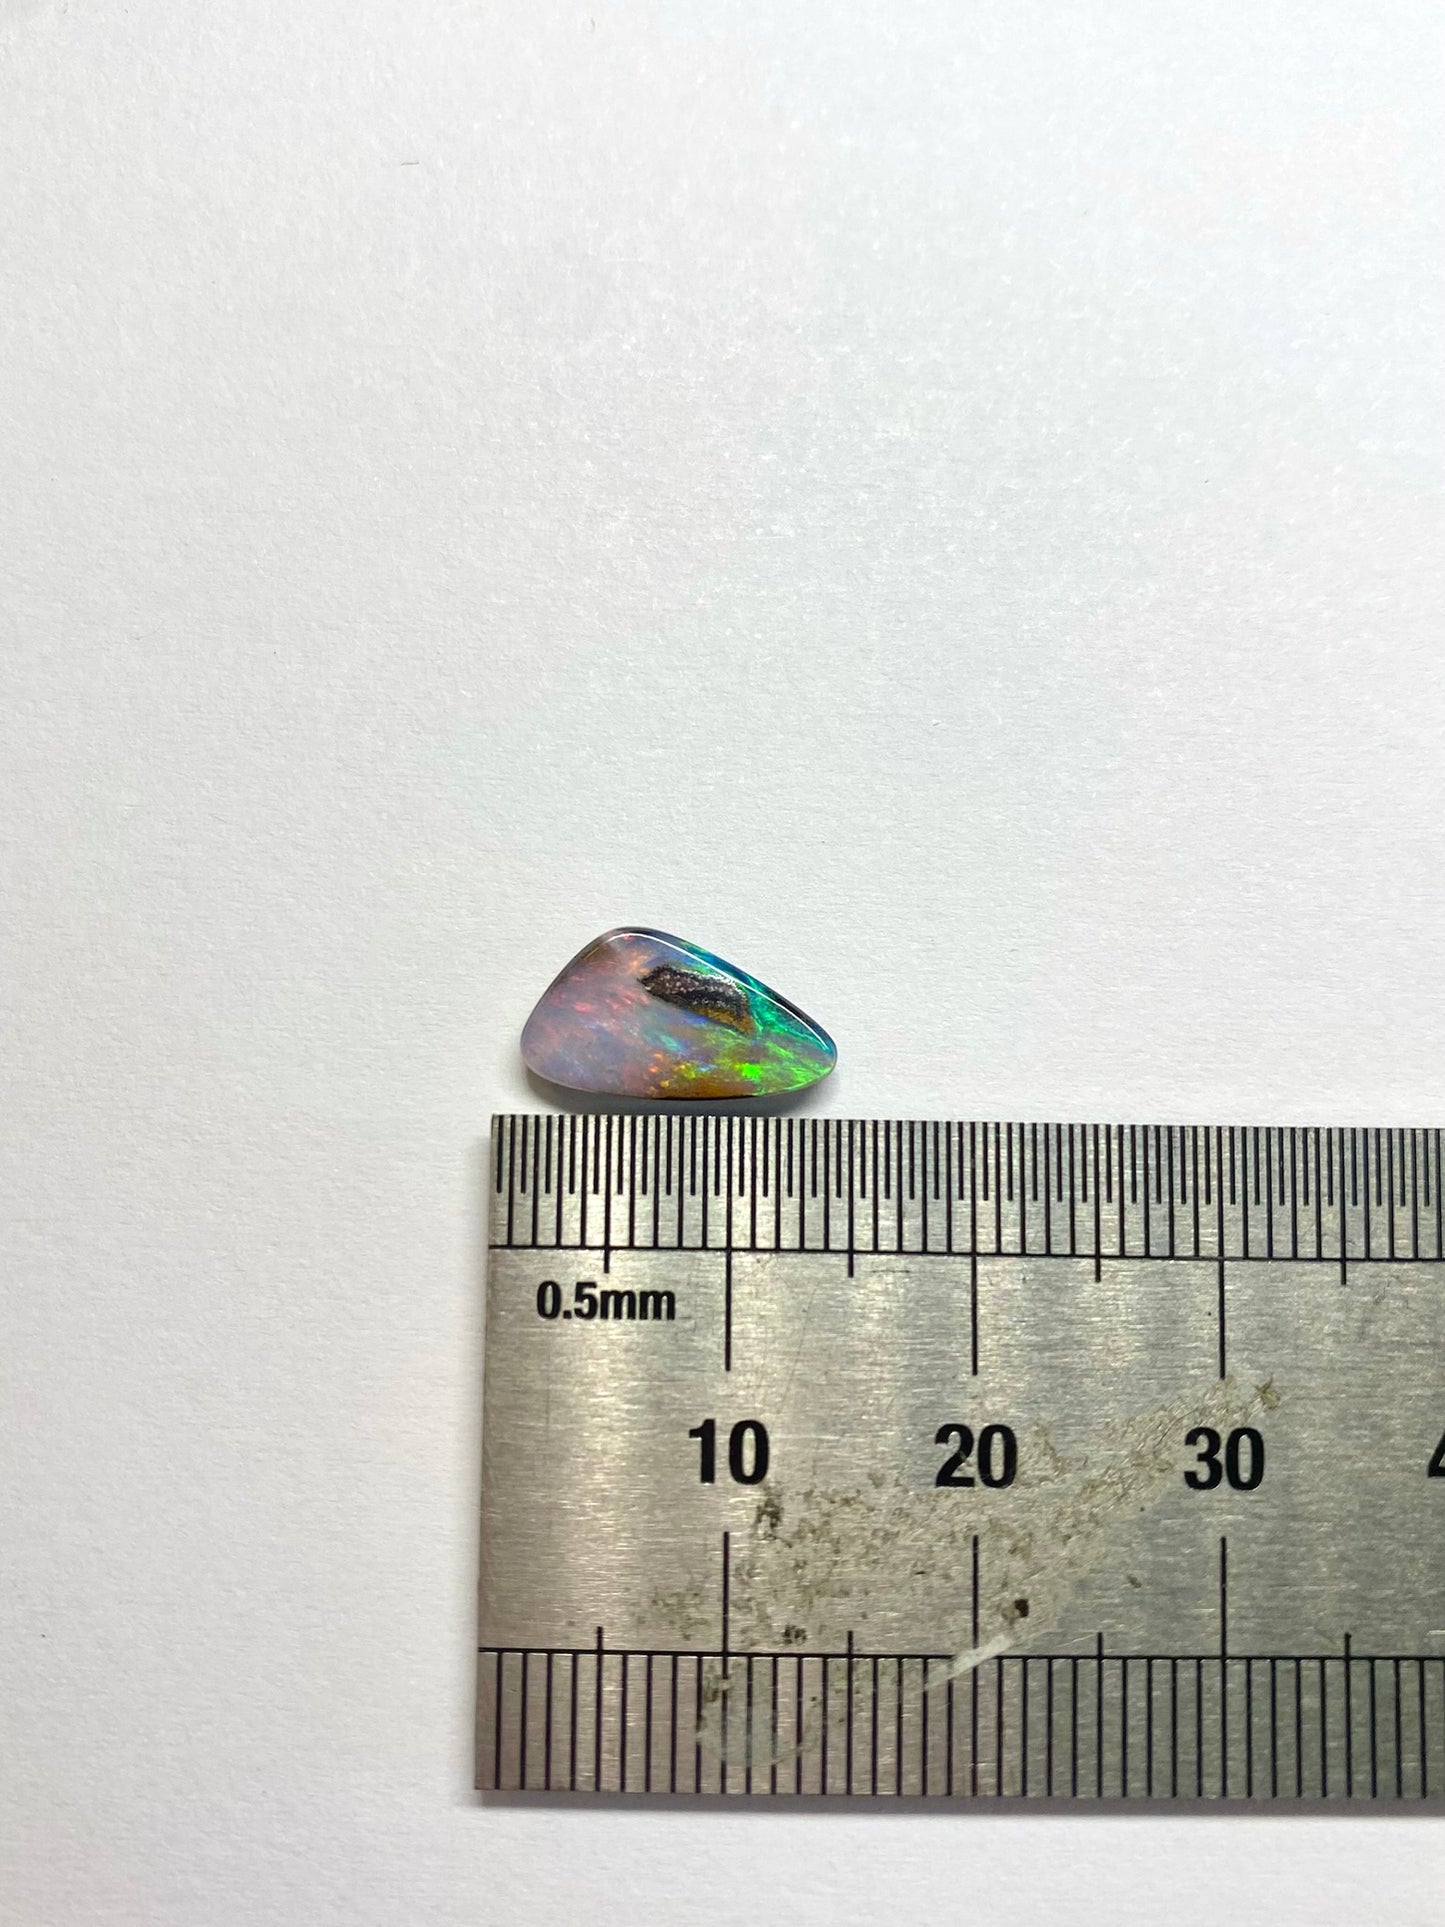 Northern Lights Opal - custom made in a ring for you